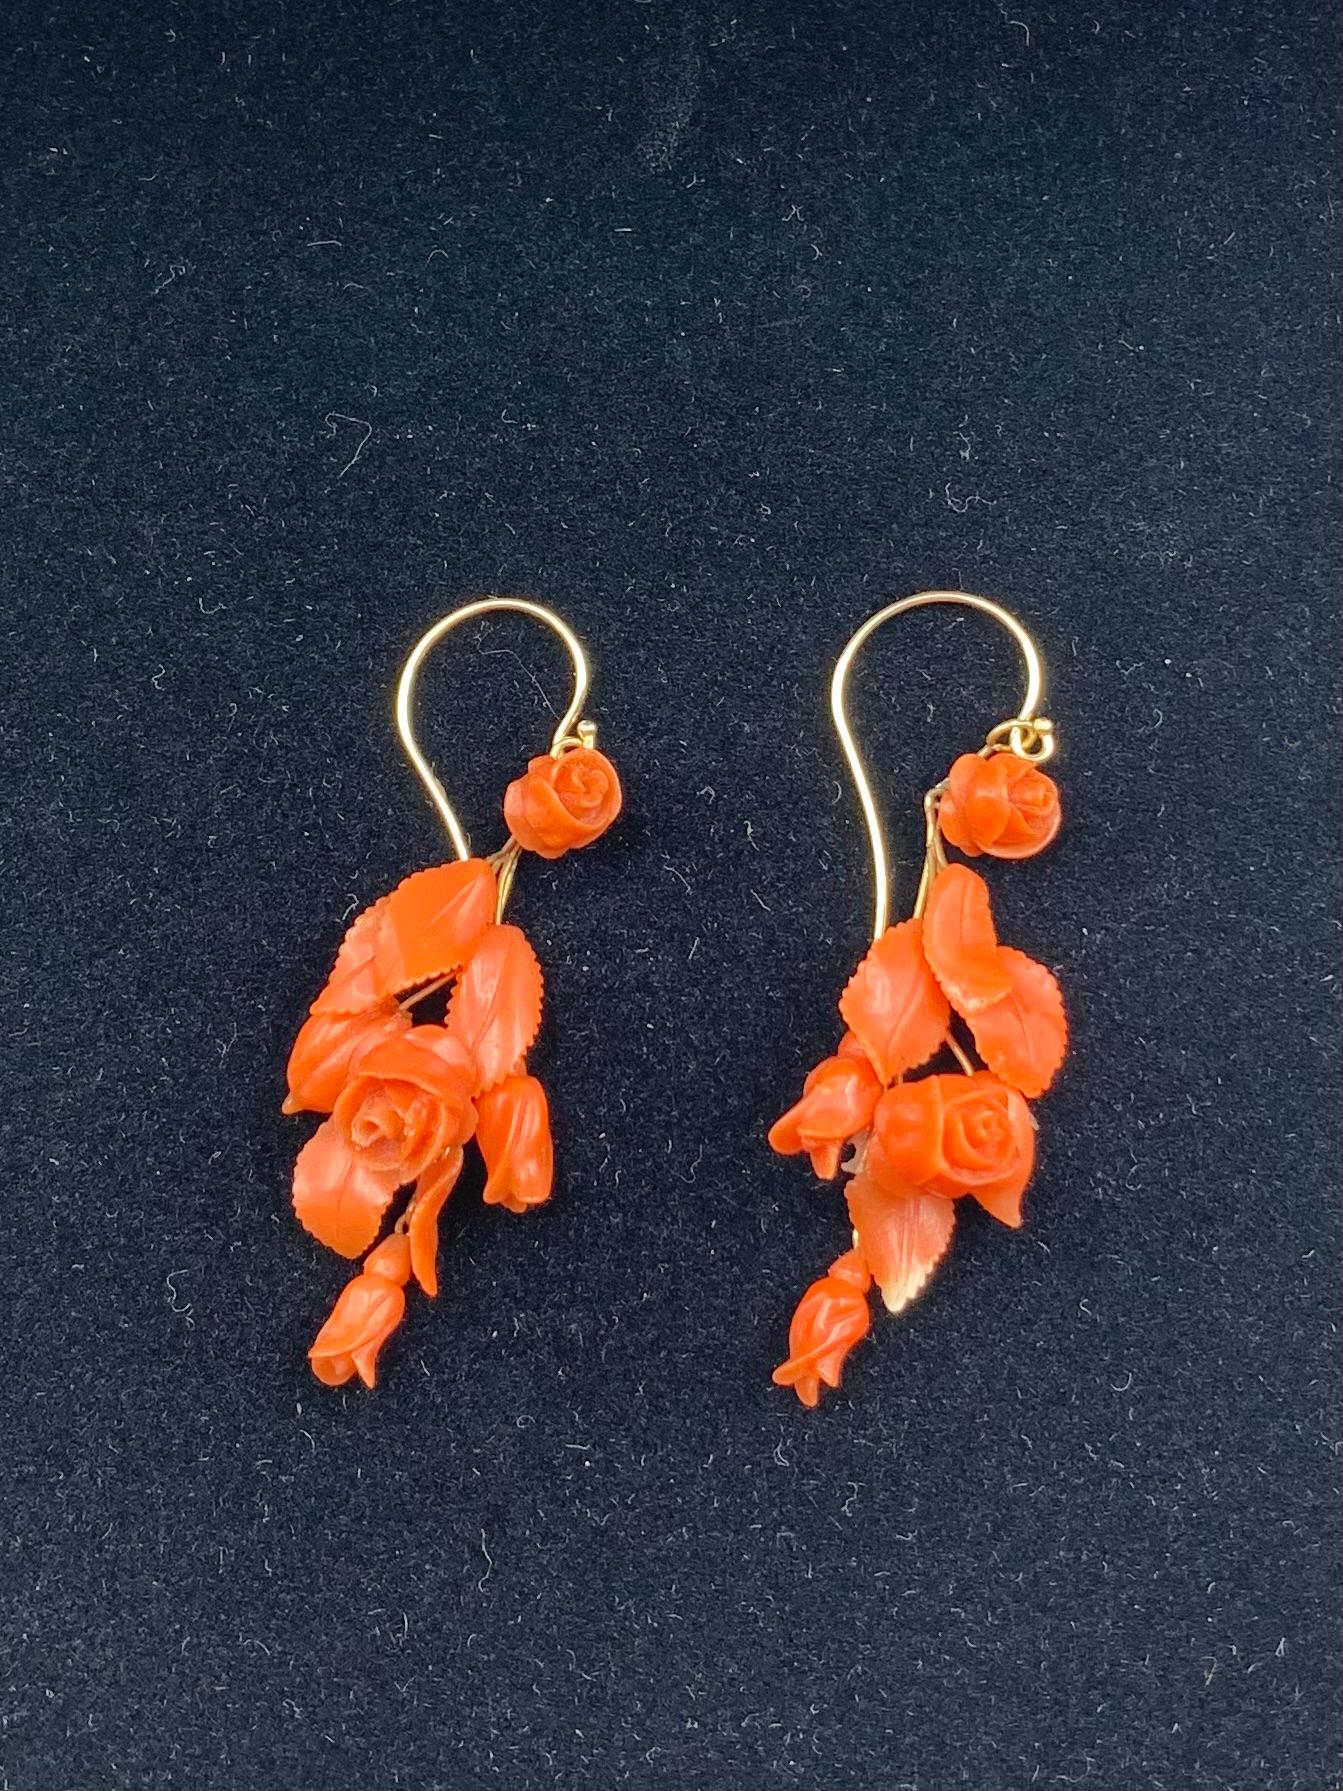 Very fine quality antique carved red coral and 14K yellow gold Rosebud earrings
19th Century
Each earring composed of delicately hand carved coral rosebuds and foliage ideal for a fabulous garden party.
Tested for 14K gold
Length: 1.88 inches
Width: